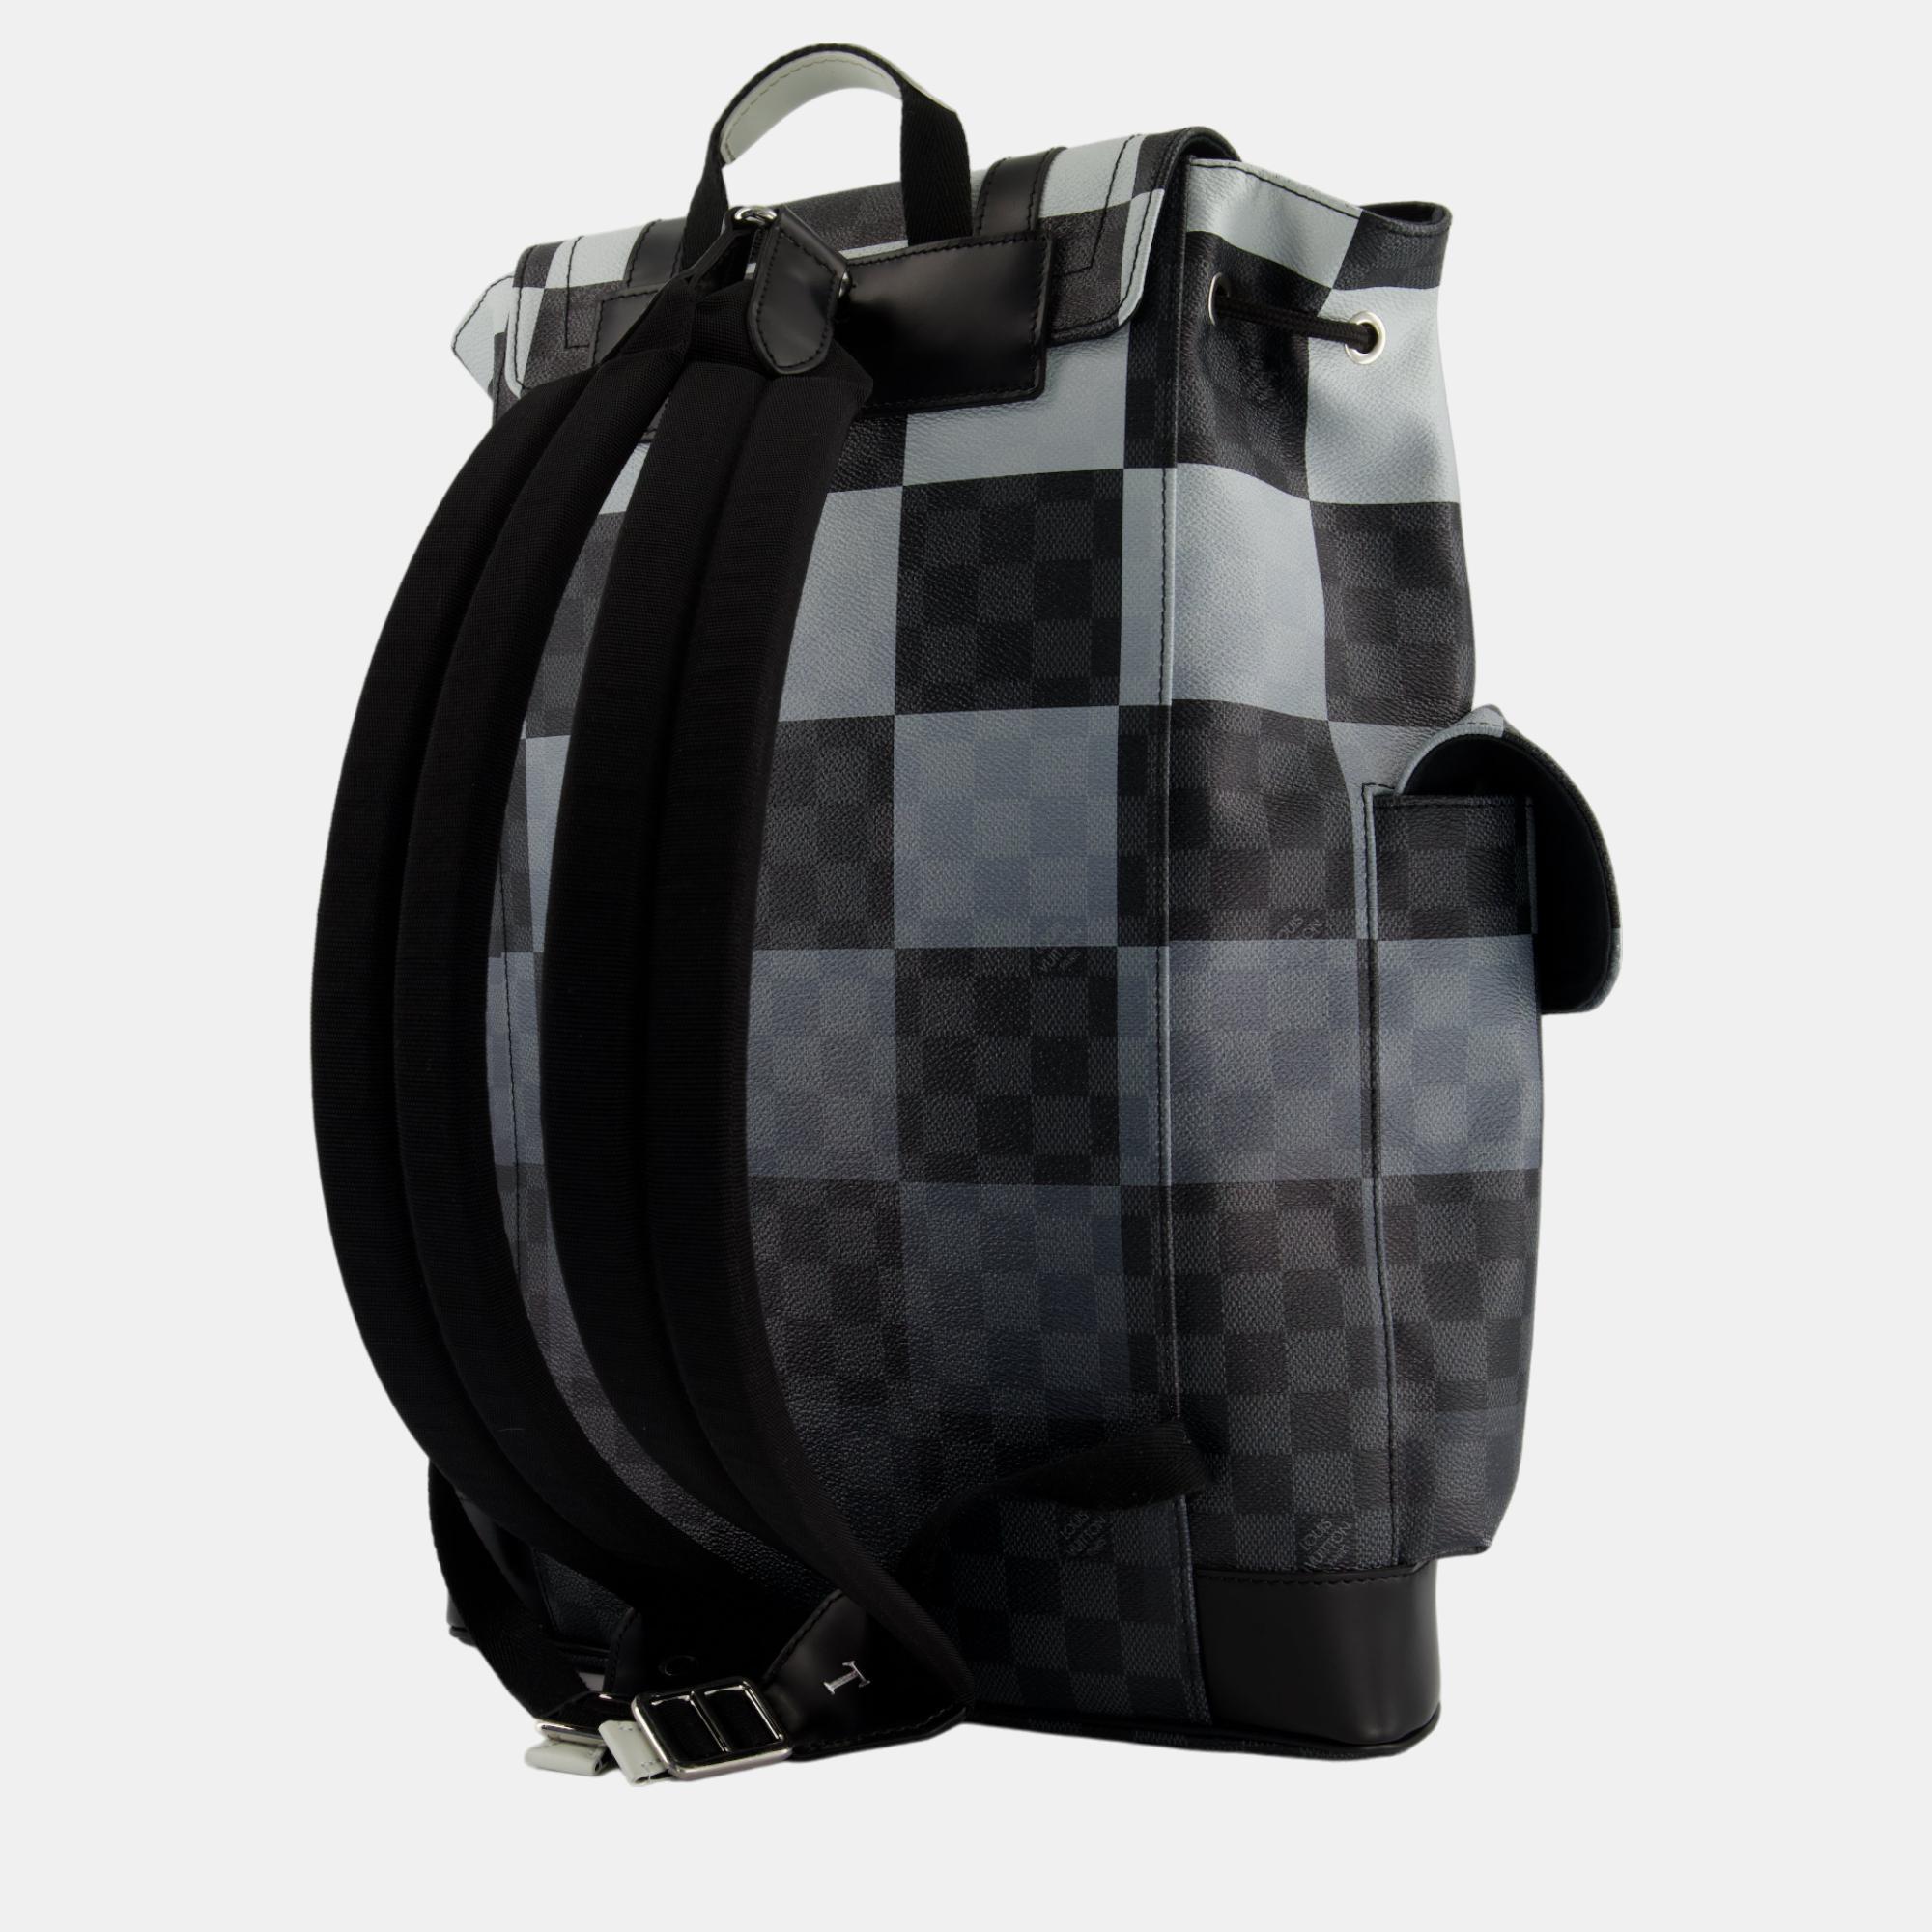 Louis Vuitton Christopher Backpack Bag In Black And White Damier Canvas With Silver Hardware